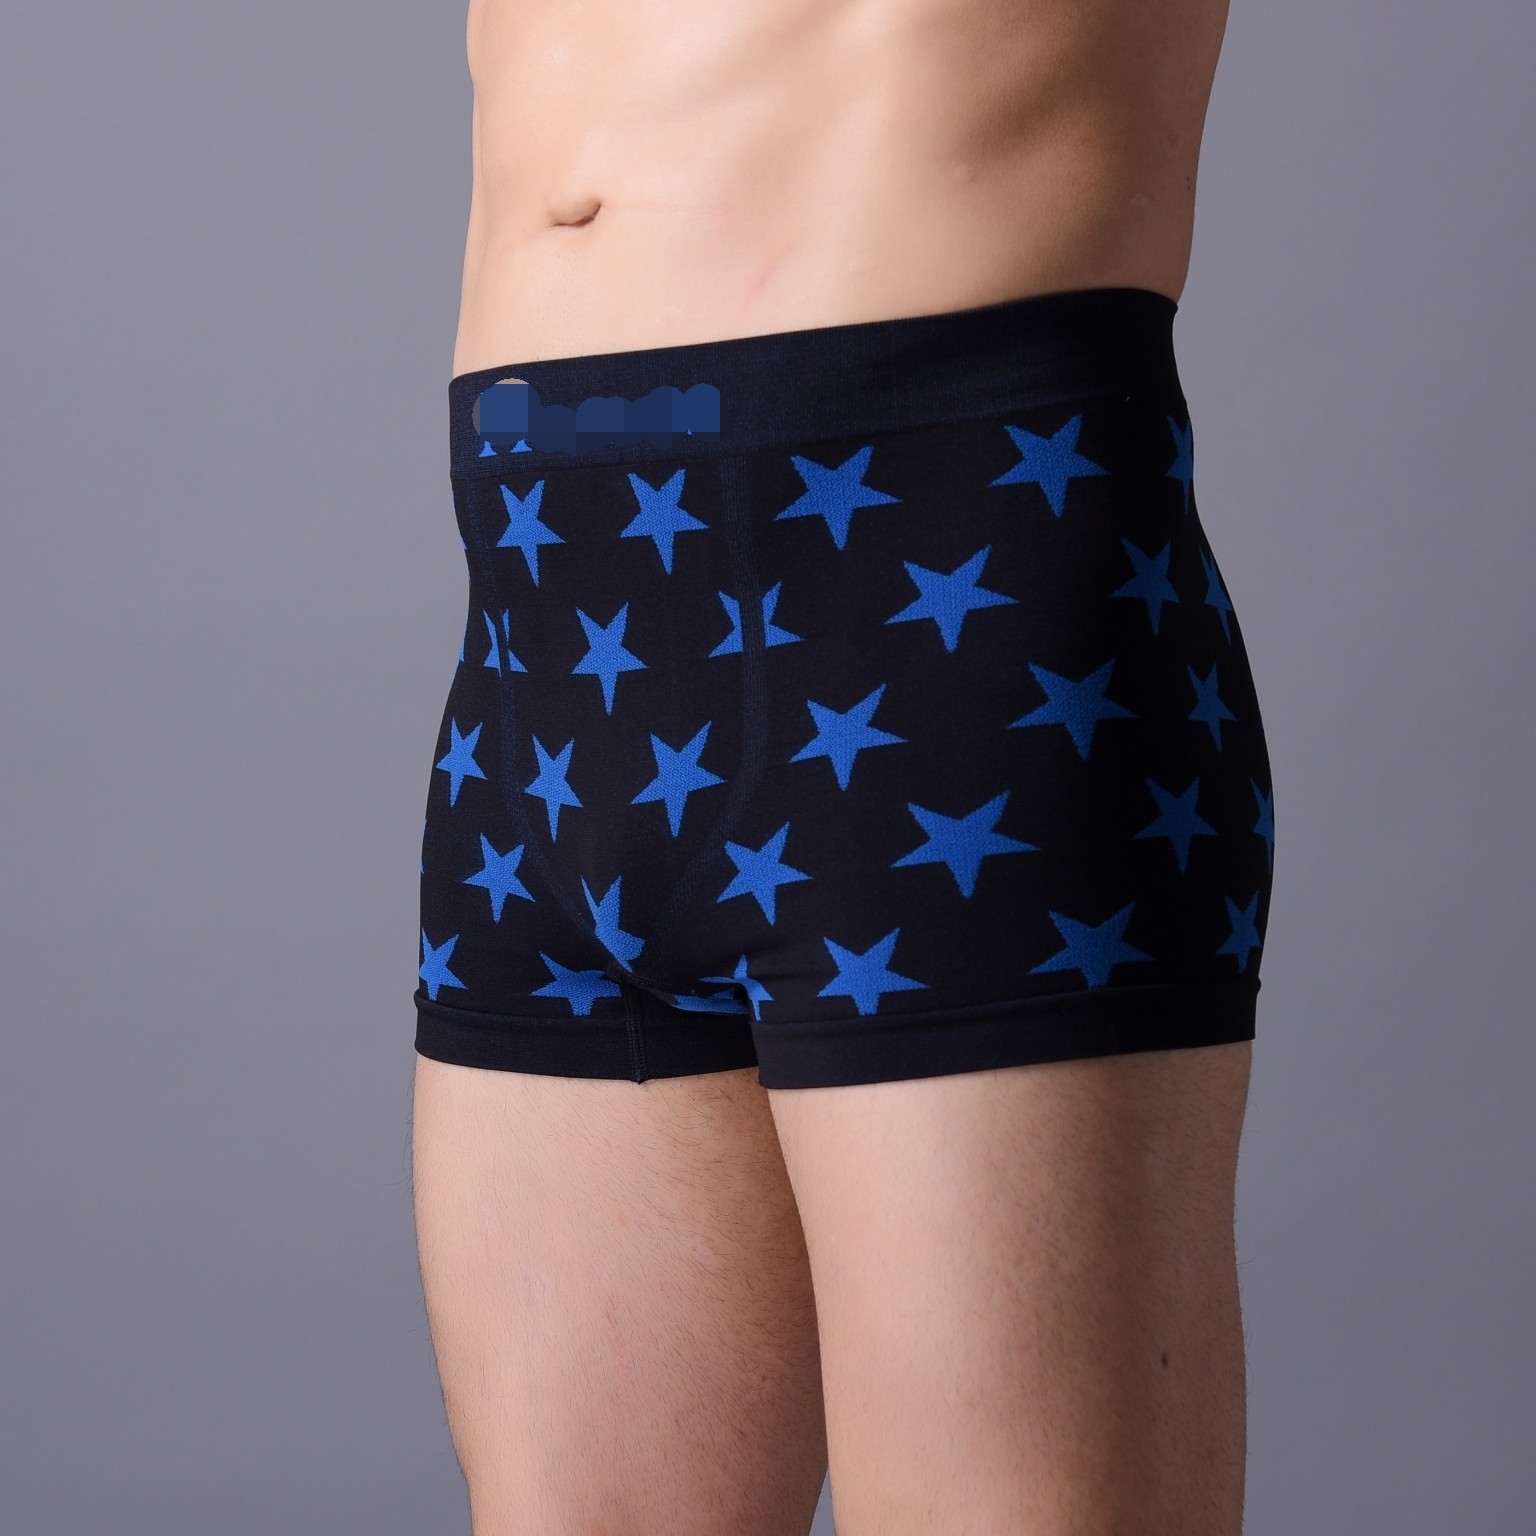 Quality Man seamless boxer,  jacquard weave, popular  fitting design,   soft weave.  XLS005, Blue star,   man shorts. for sale